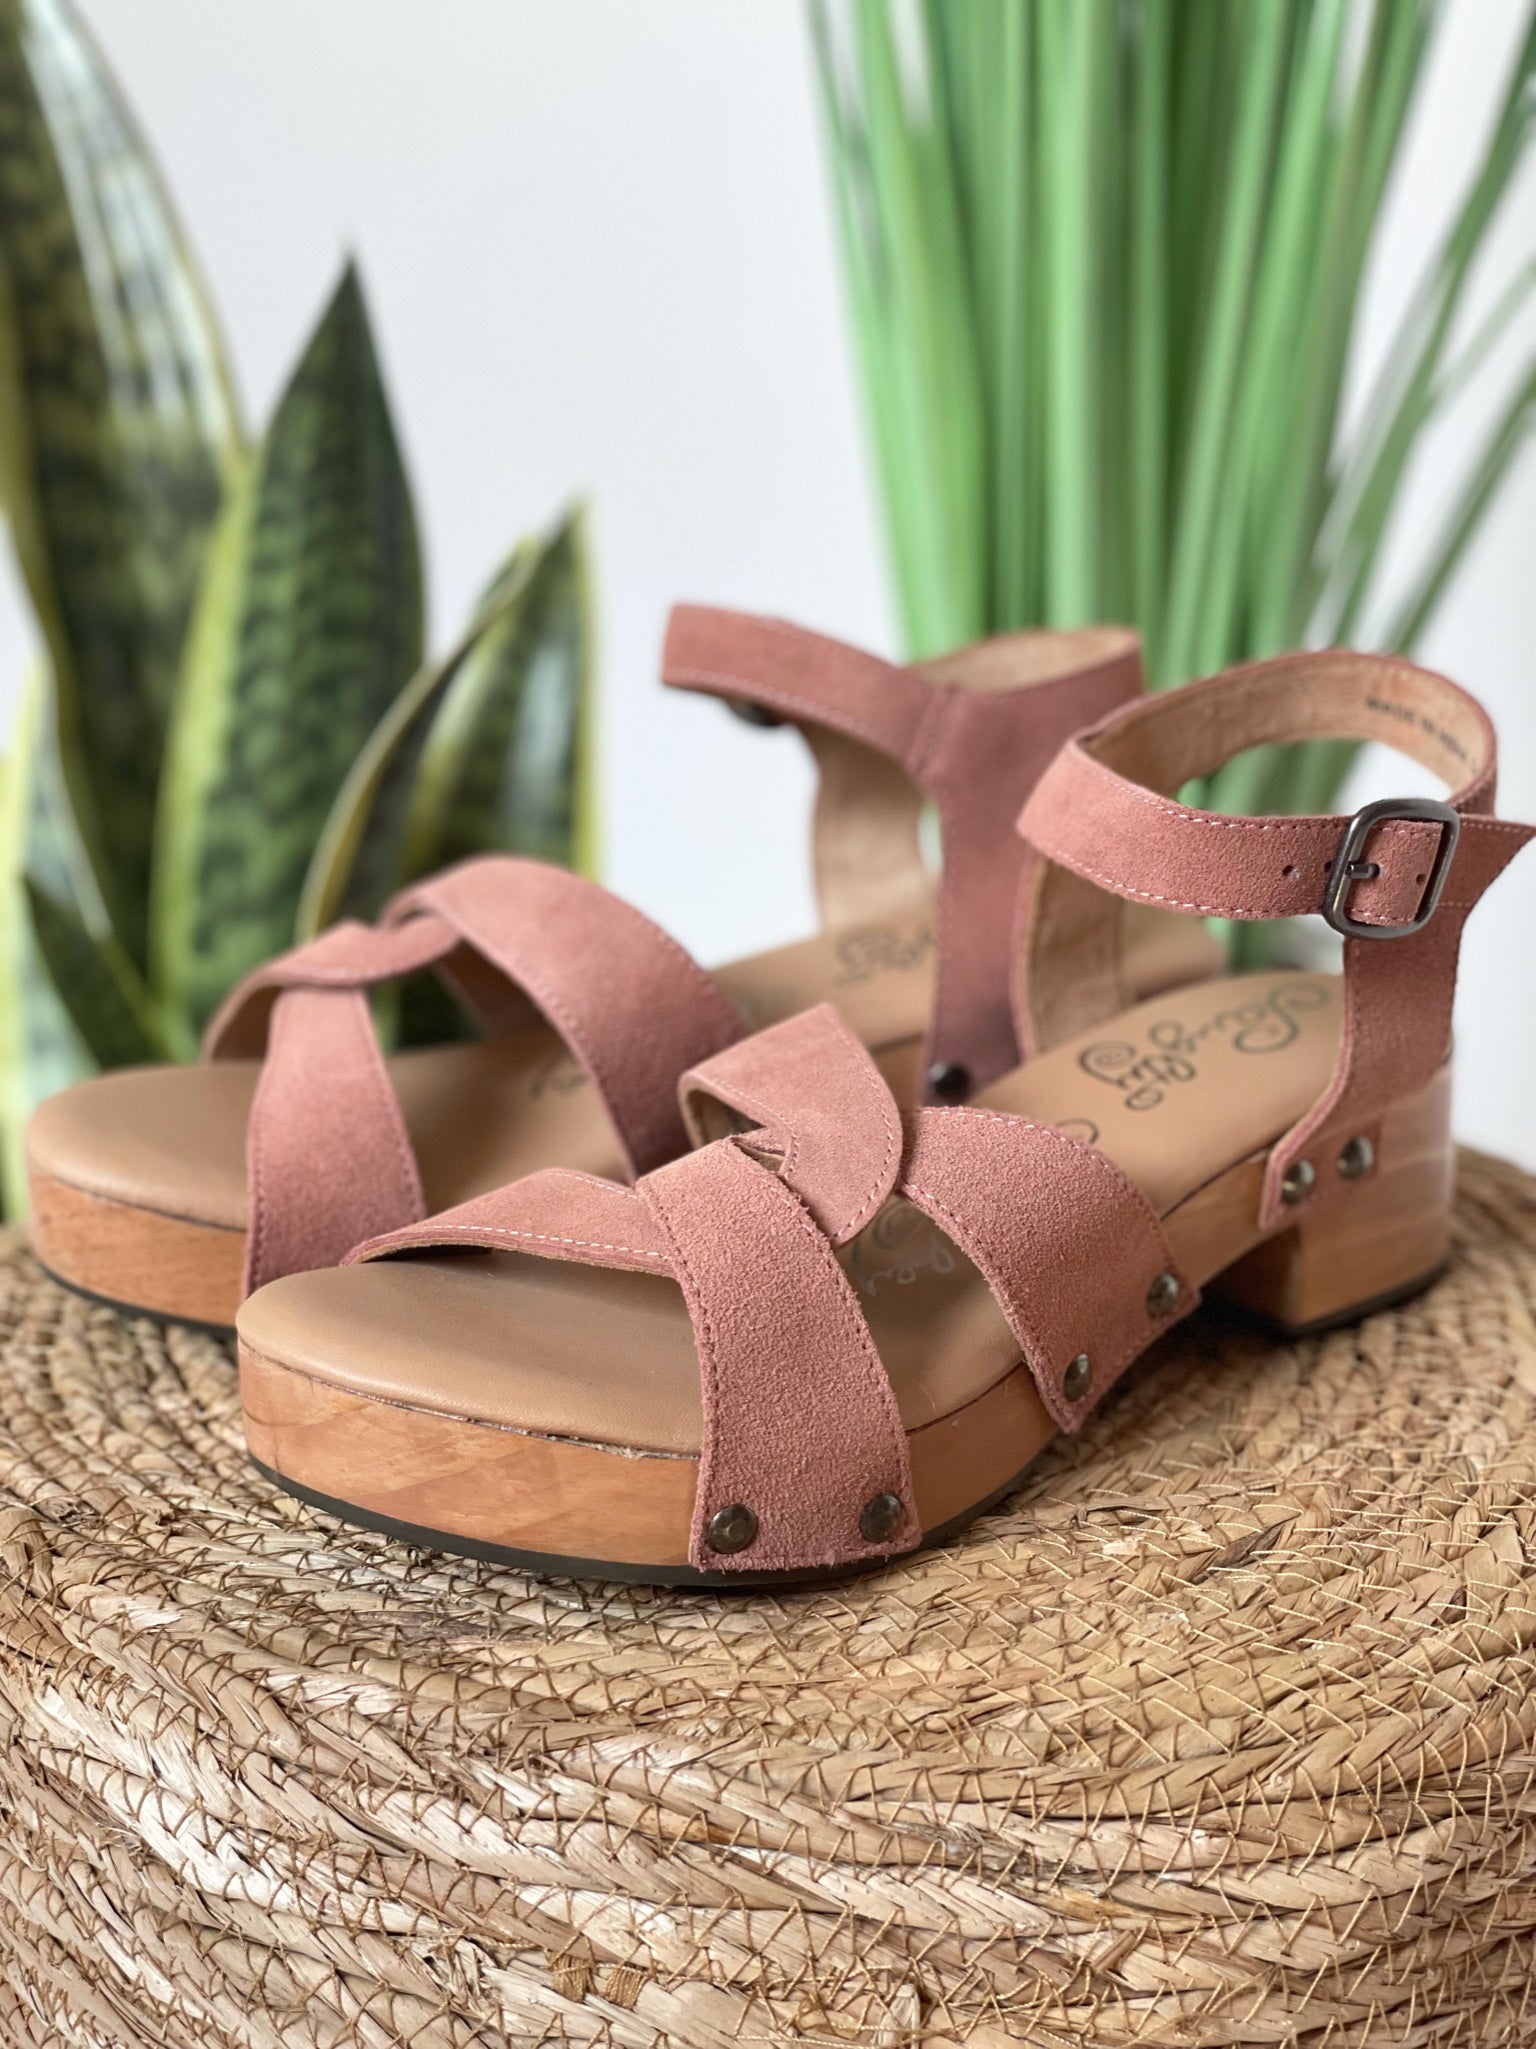 Strausse Sandals in Rose